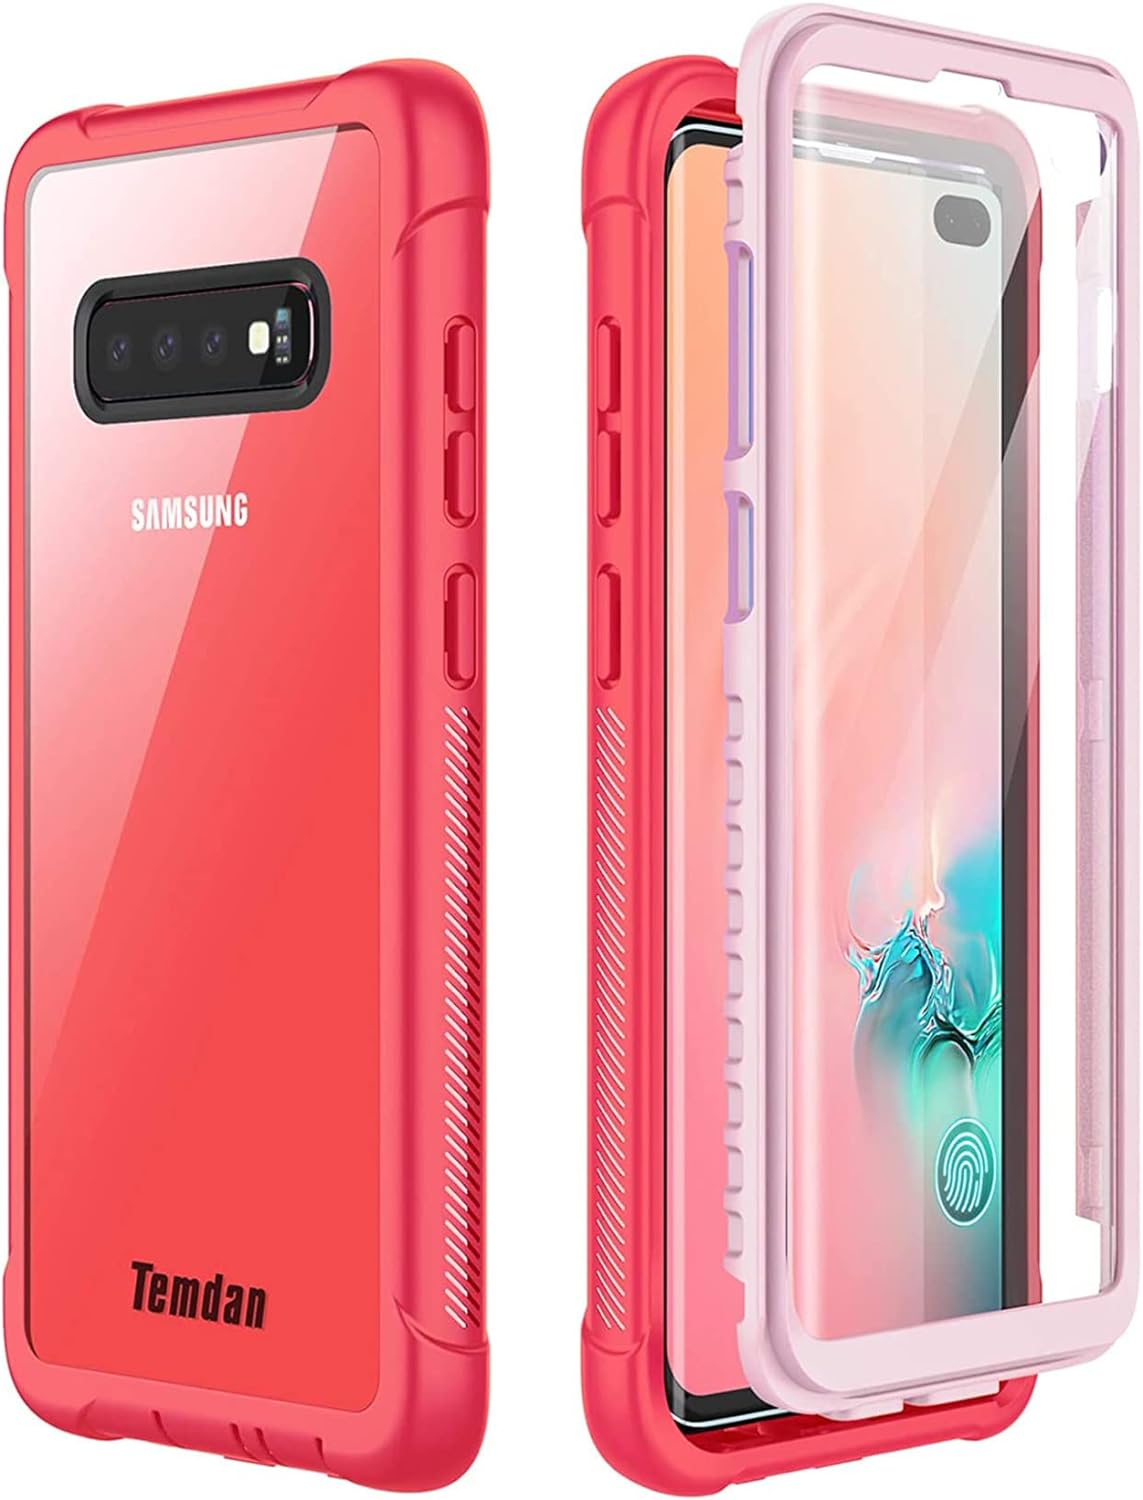 Temdan Samsung Galaxy S10 Plus Case, Built-in Screen Protector with Fingerprint Hole Full Body Protect Support Wireless Charging,Heavy Duty Dropproof Case for Samsung Galaxy S10 Plus 6.4 inch (Pink)